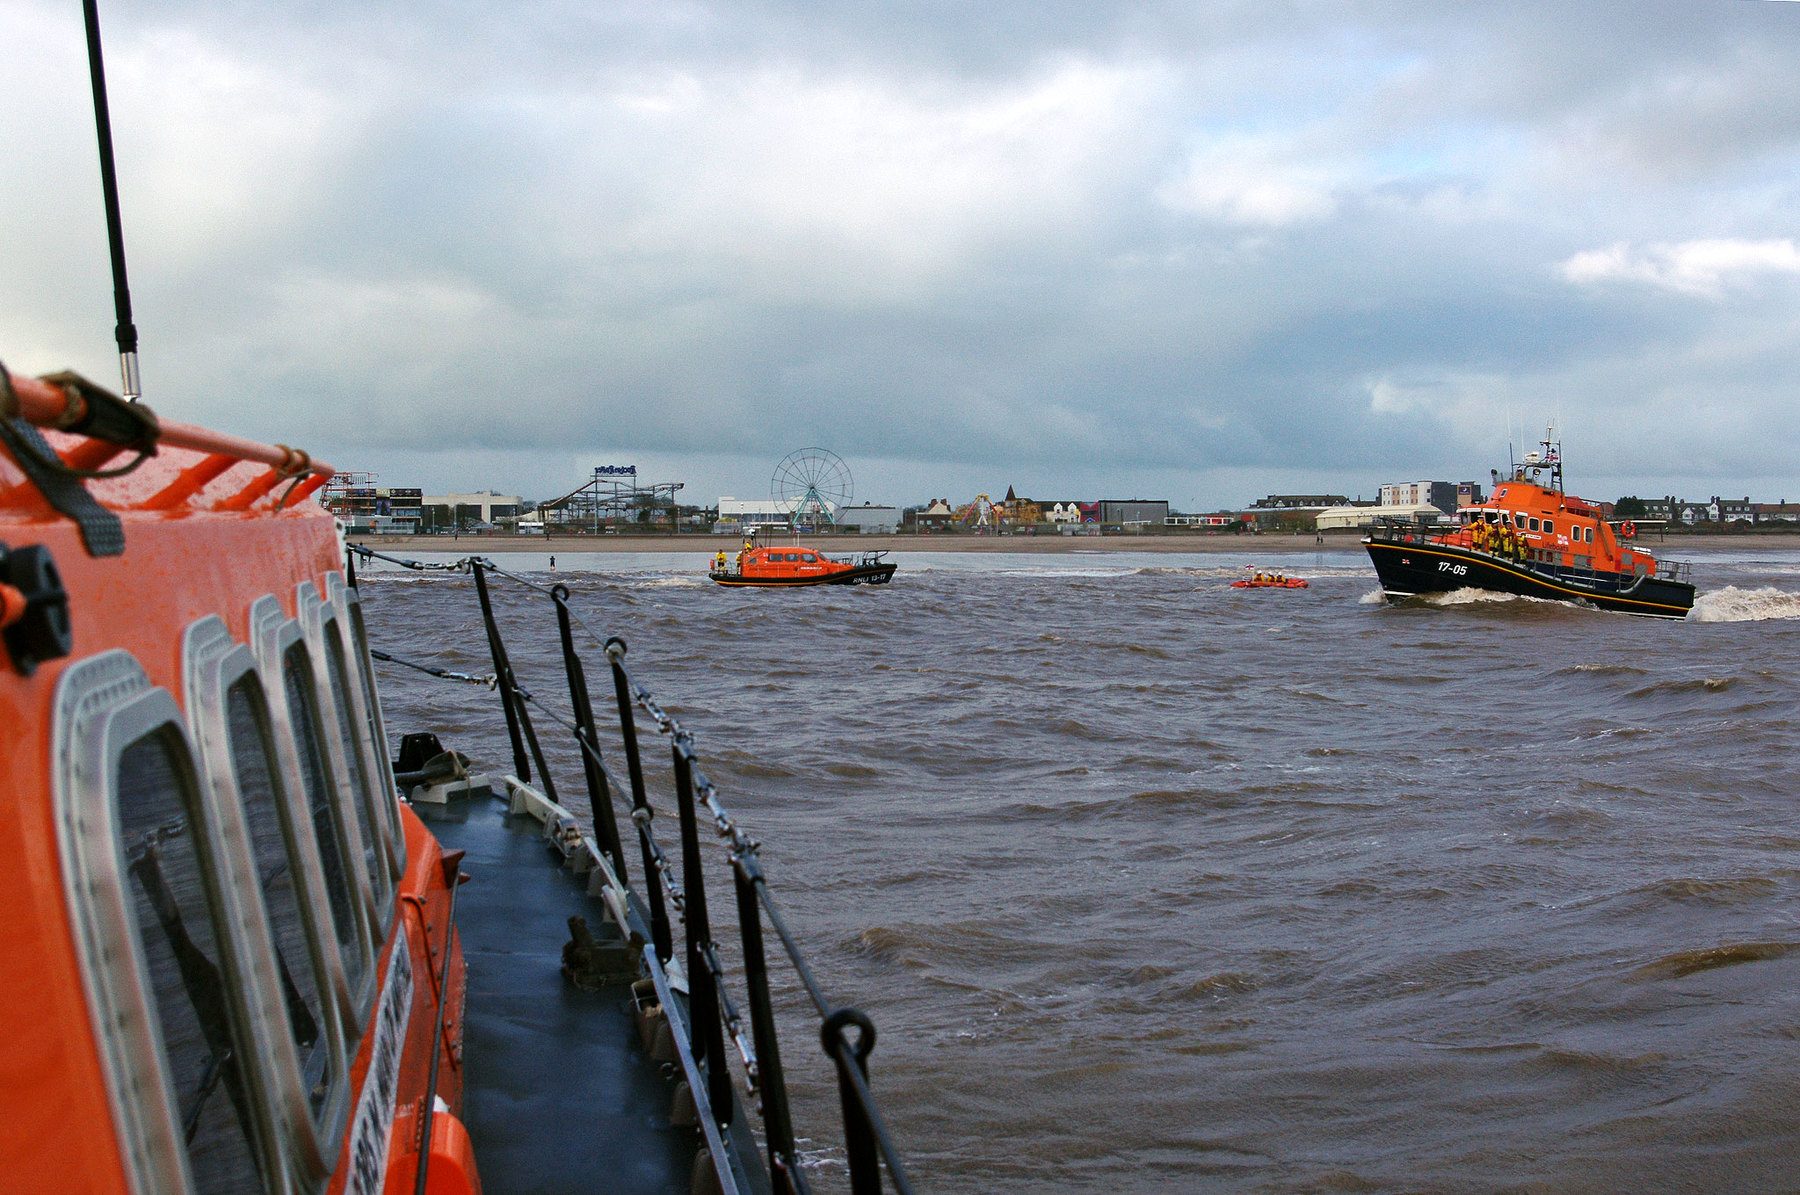 Wells lifeboat, Skegness lifeboat and inshore lifeboat and Humber lifeboat off Skegness beach